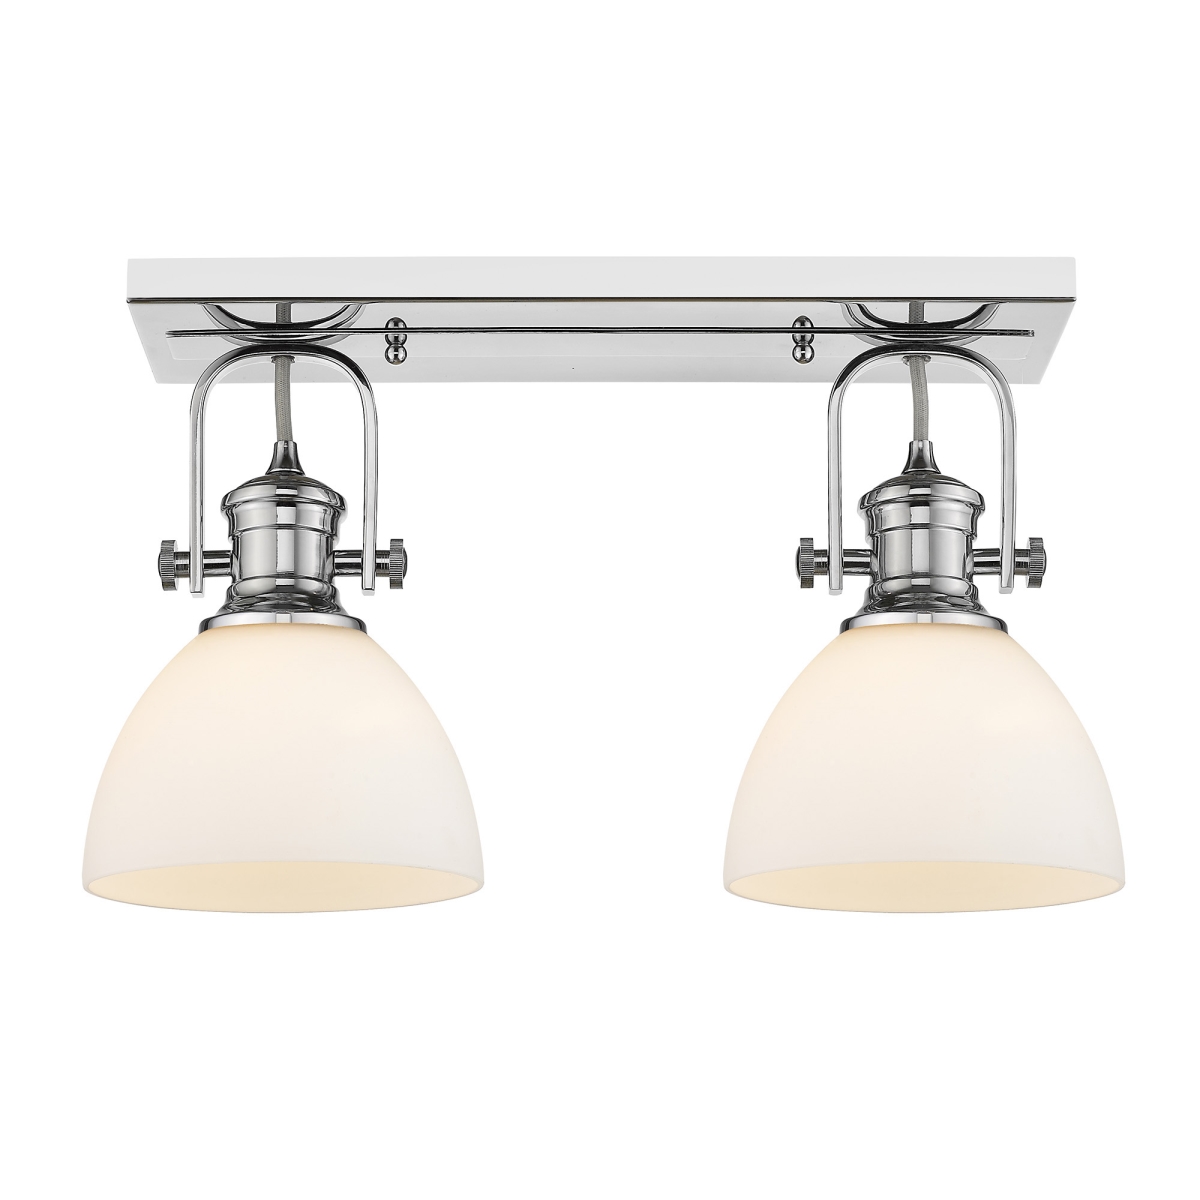 3118-2sf Ch-op Hines 2 Light In Chrome With Opal Glass